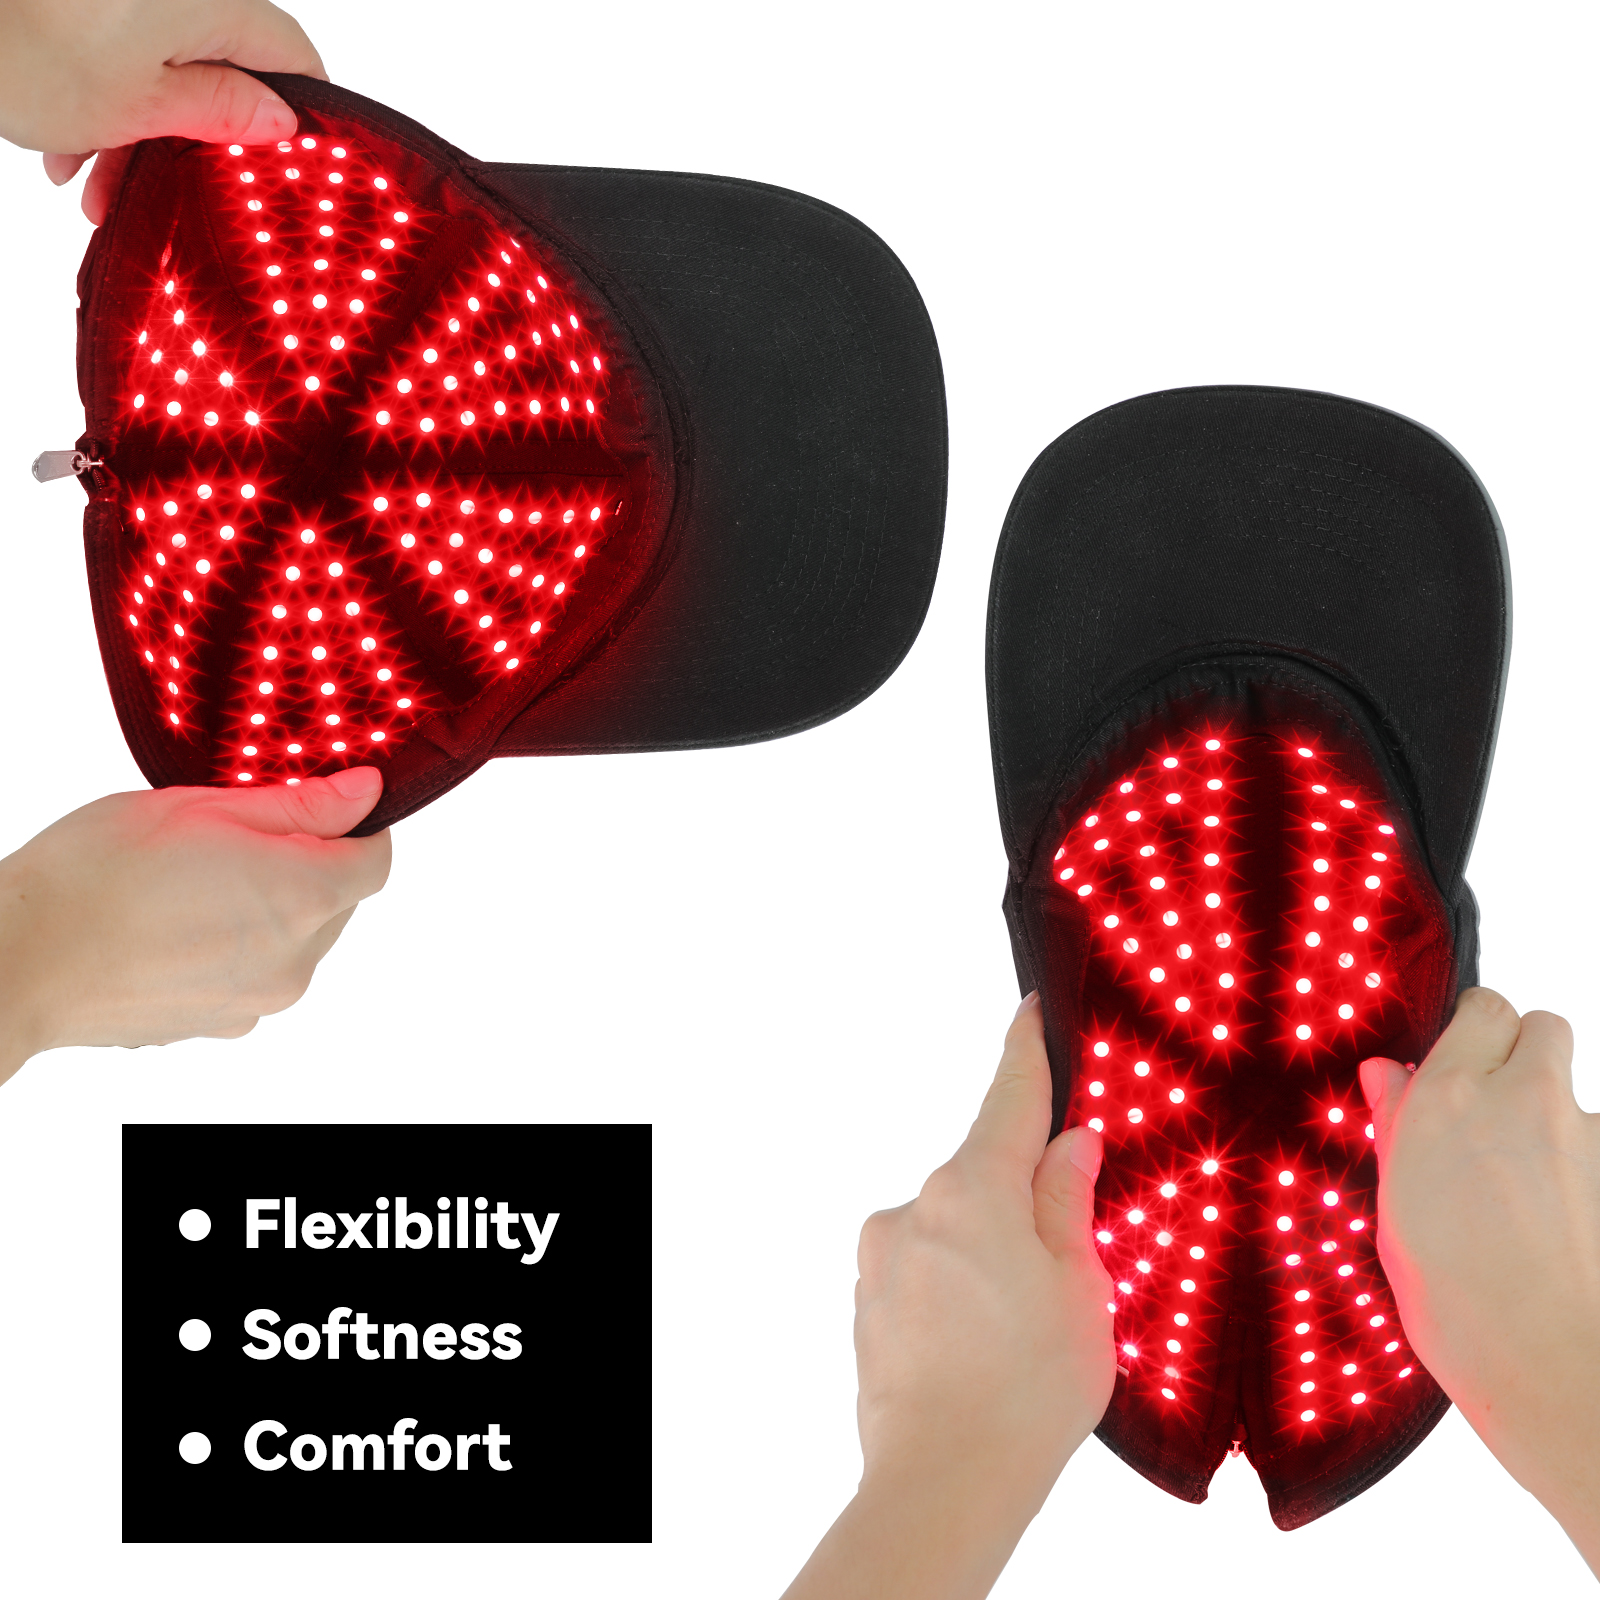 Best Sales Red Light Therapy Cap For Hair Regrowth Manufacturer From China Focus On RLT